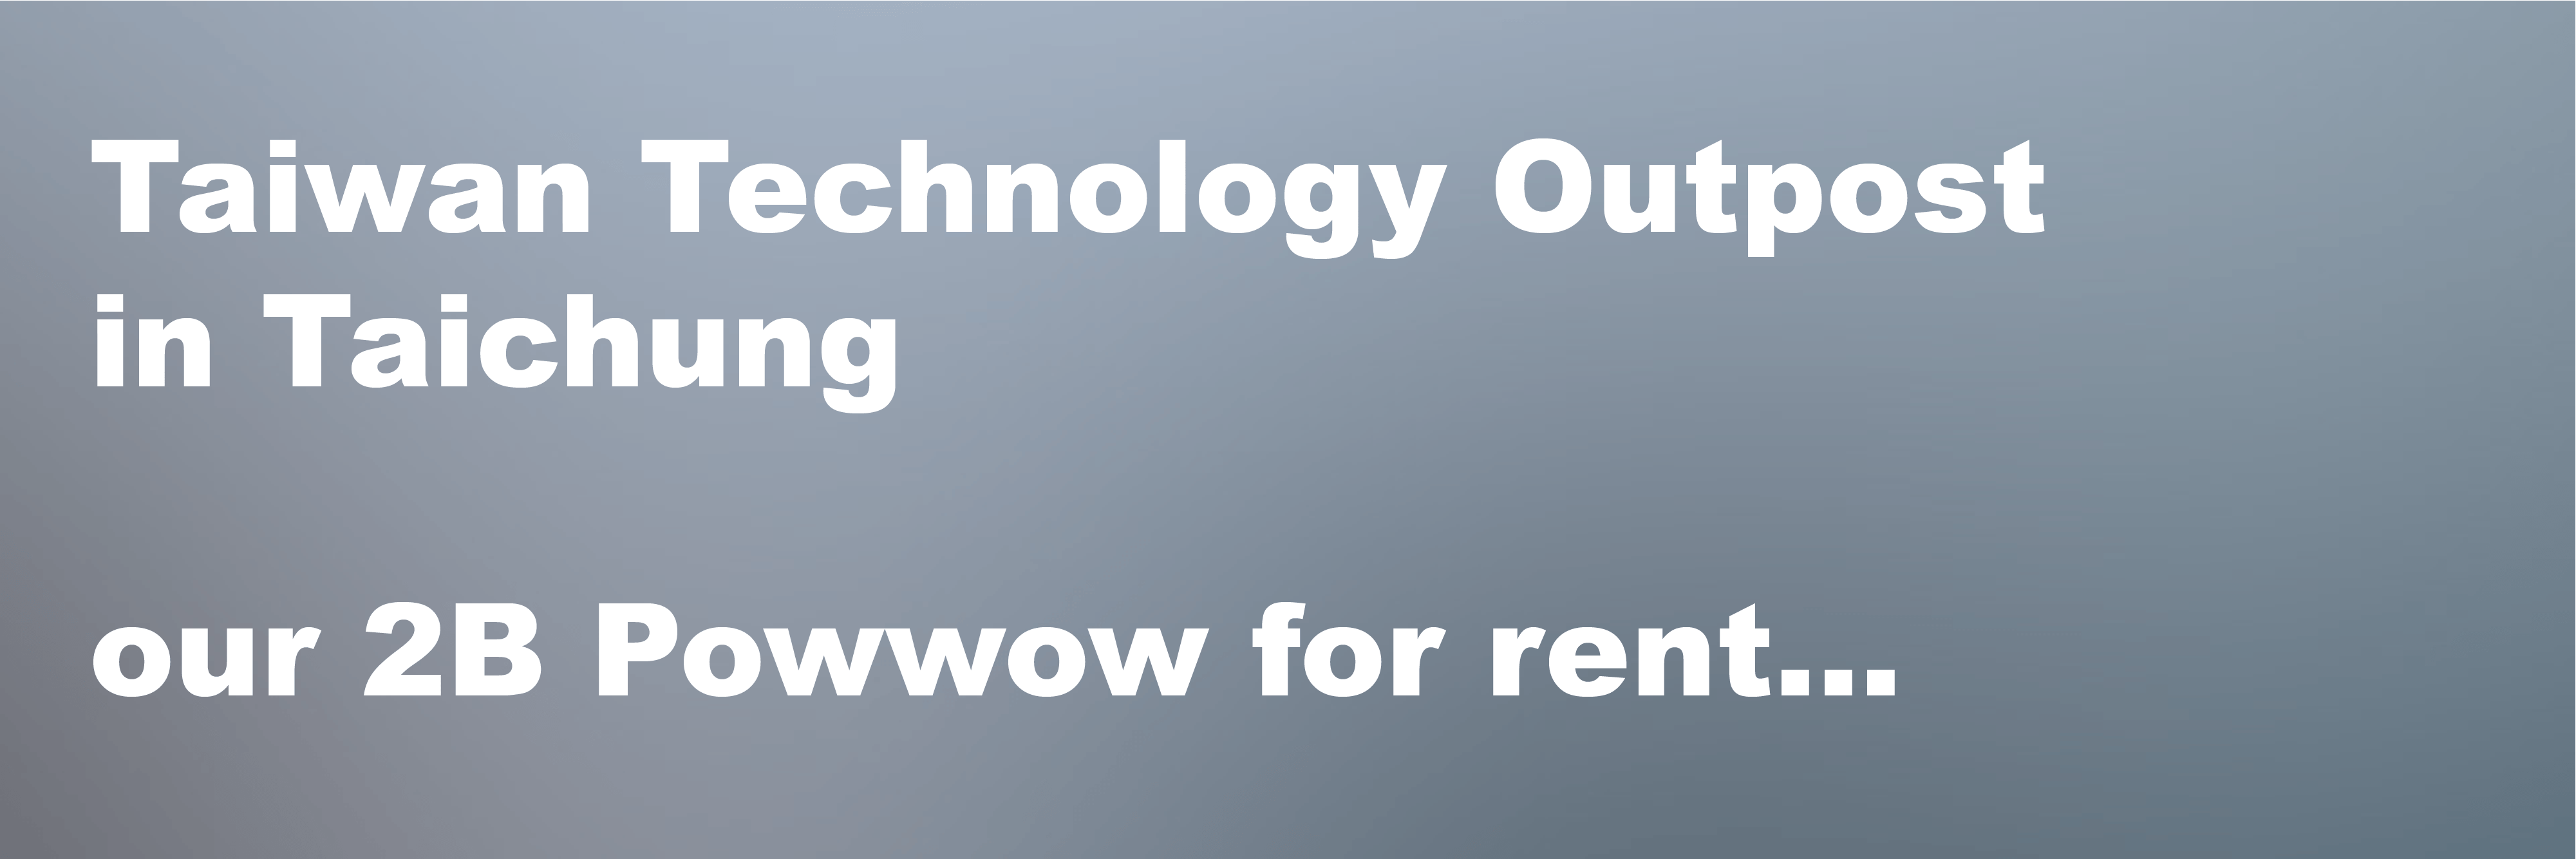 Taiwan Technology Outpost In Taichung Office Rental Powwow